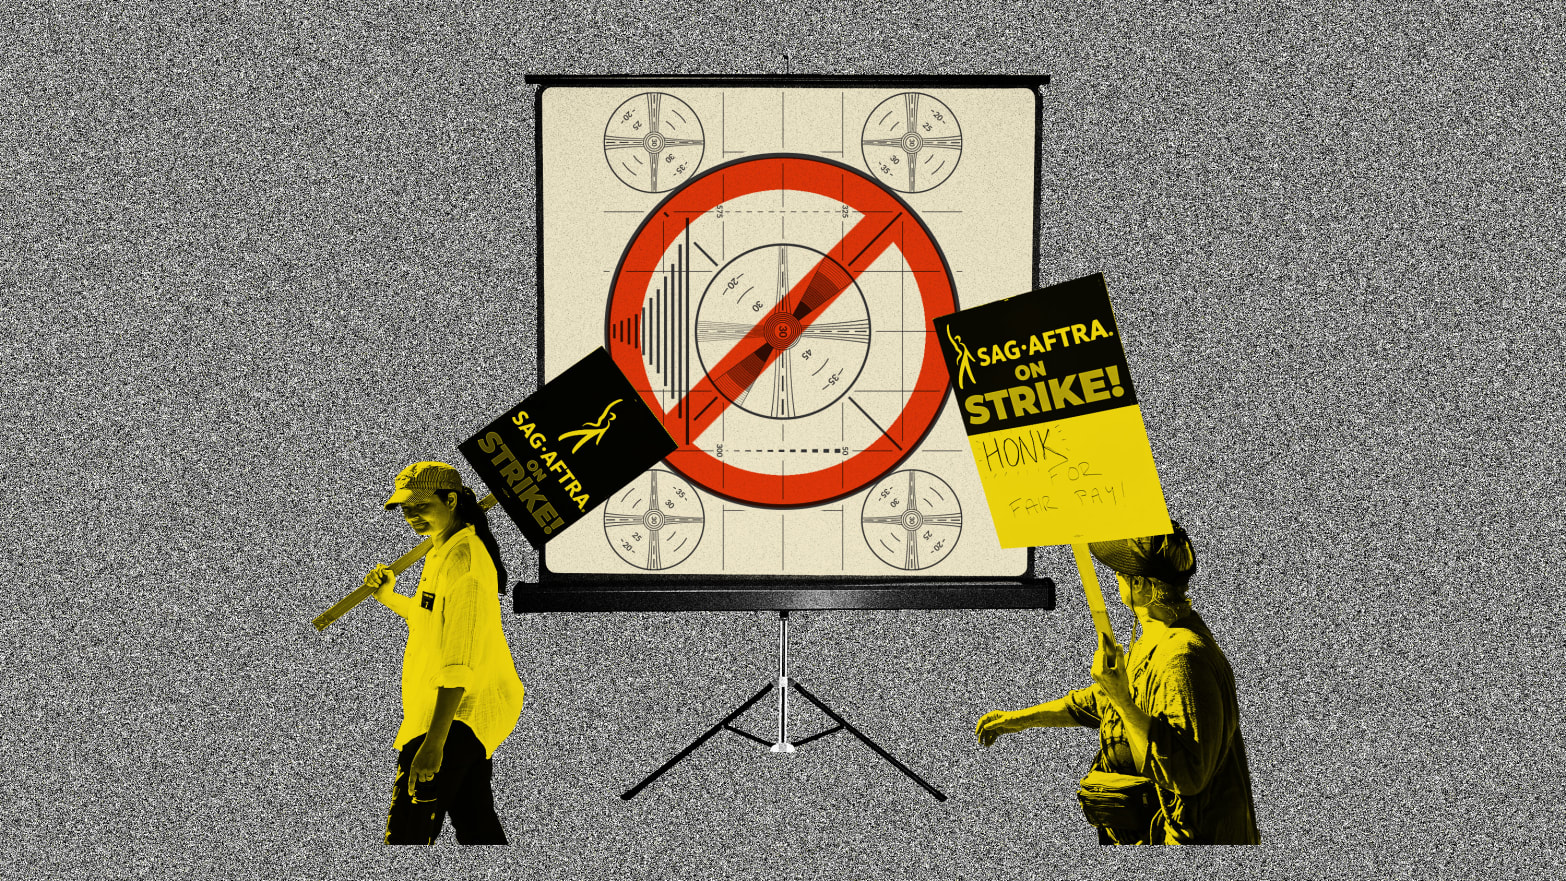 SAG-AFTRA protestors in front of a standing projector screen with a screen test and a red circle with a line through it/stop sign overlaid on top.